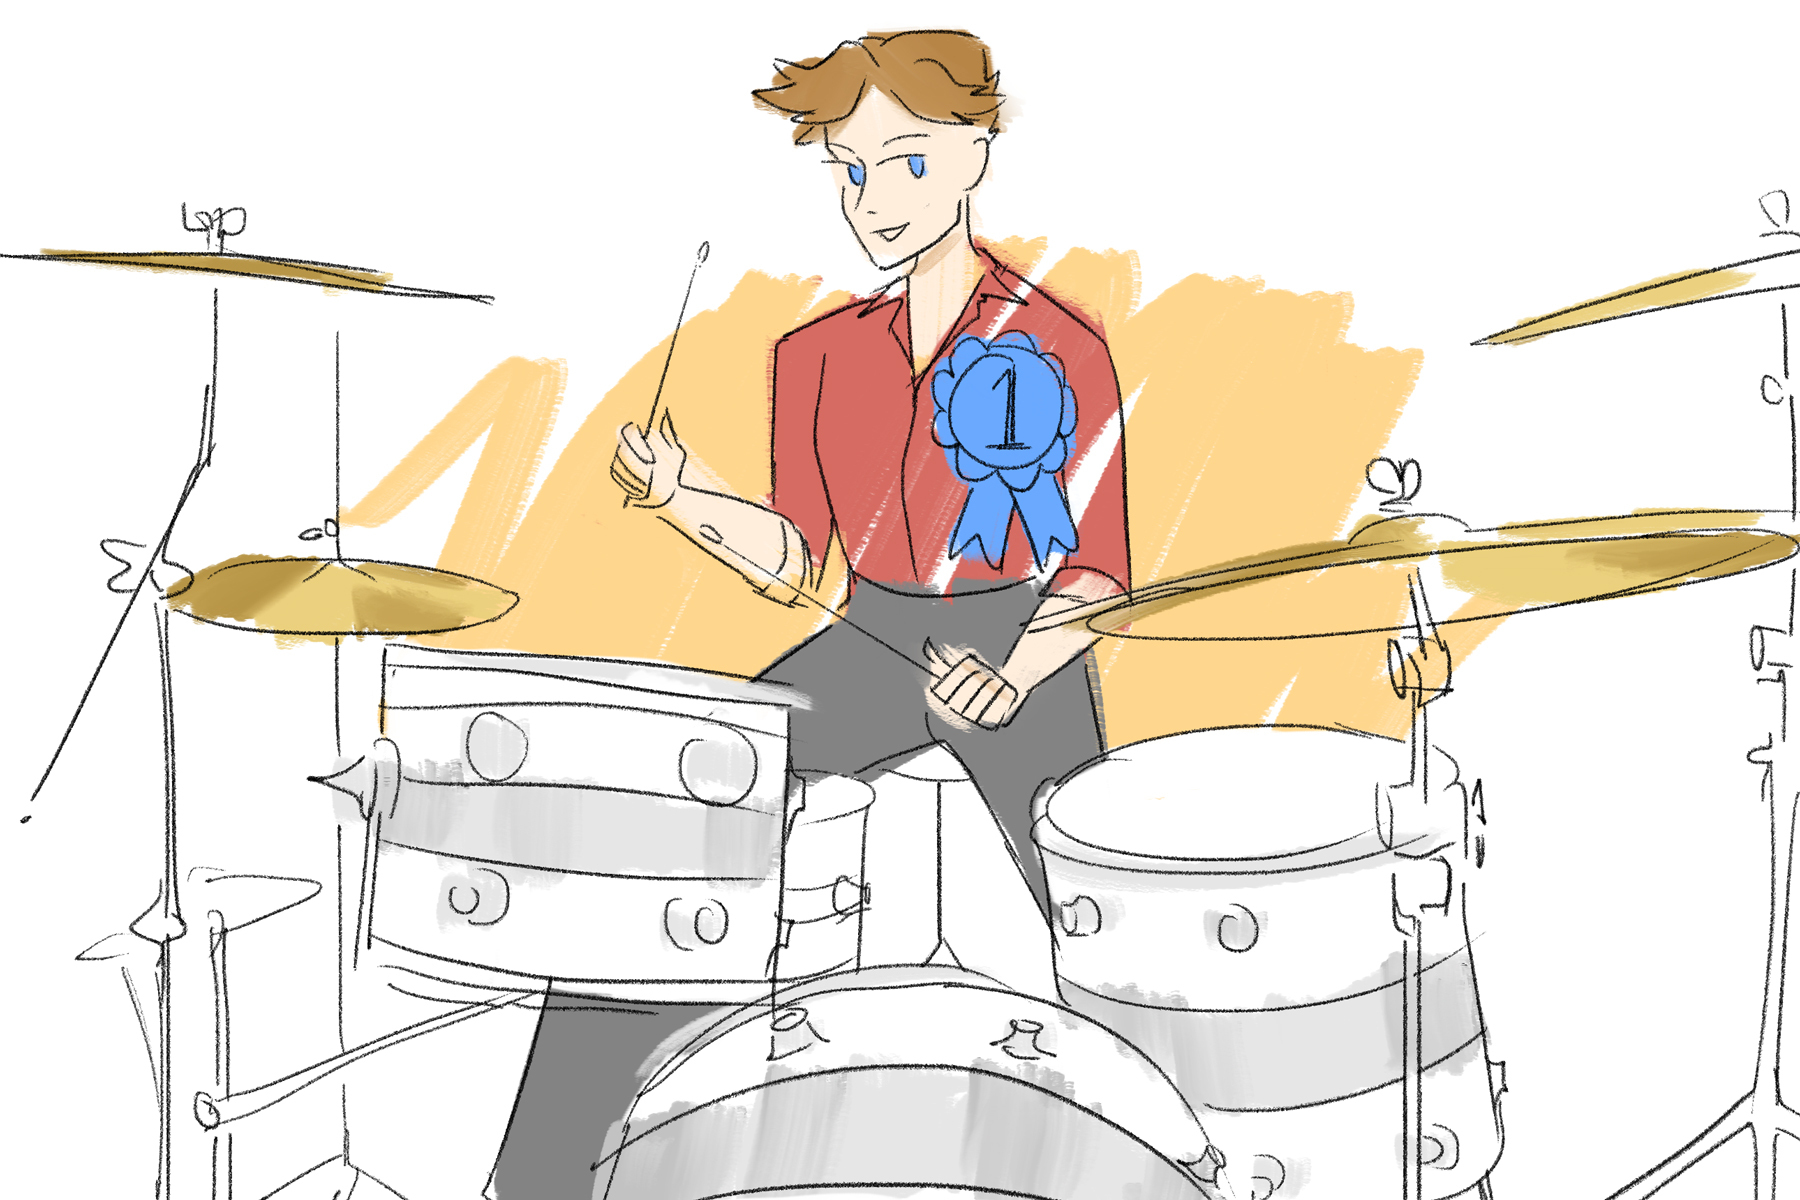 Illustration of a drummer with a "Number 1" award pinned to his shirt for the Drumeo Awards.